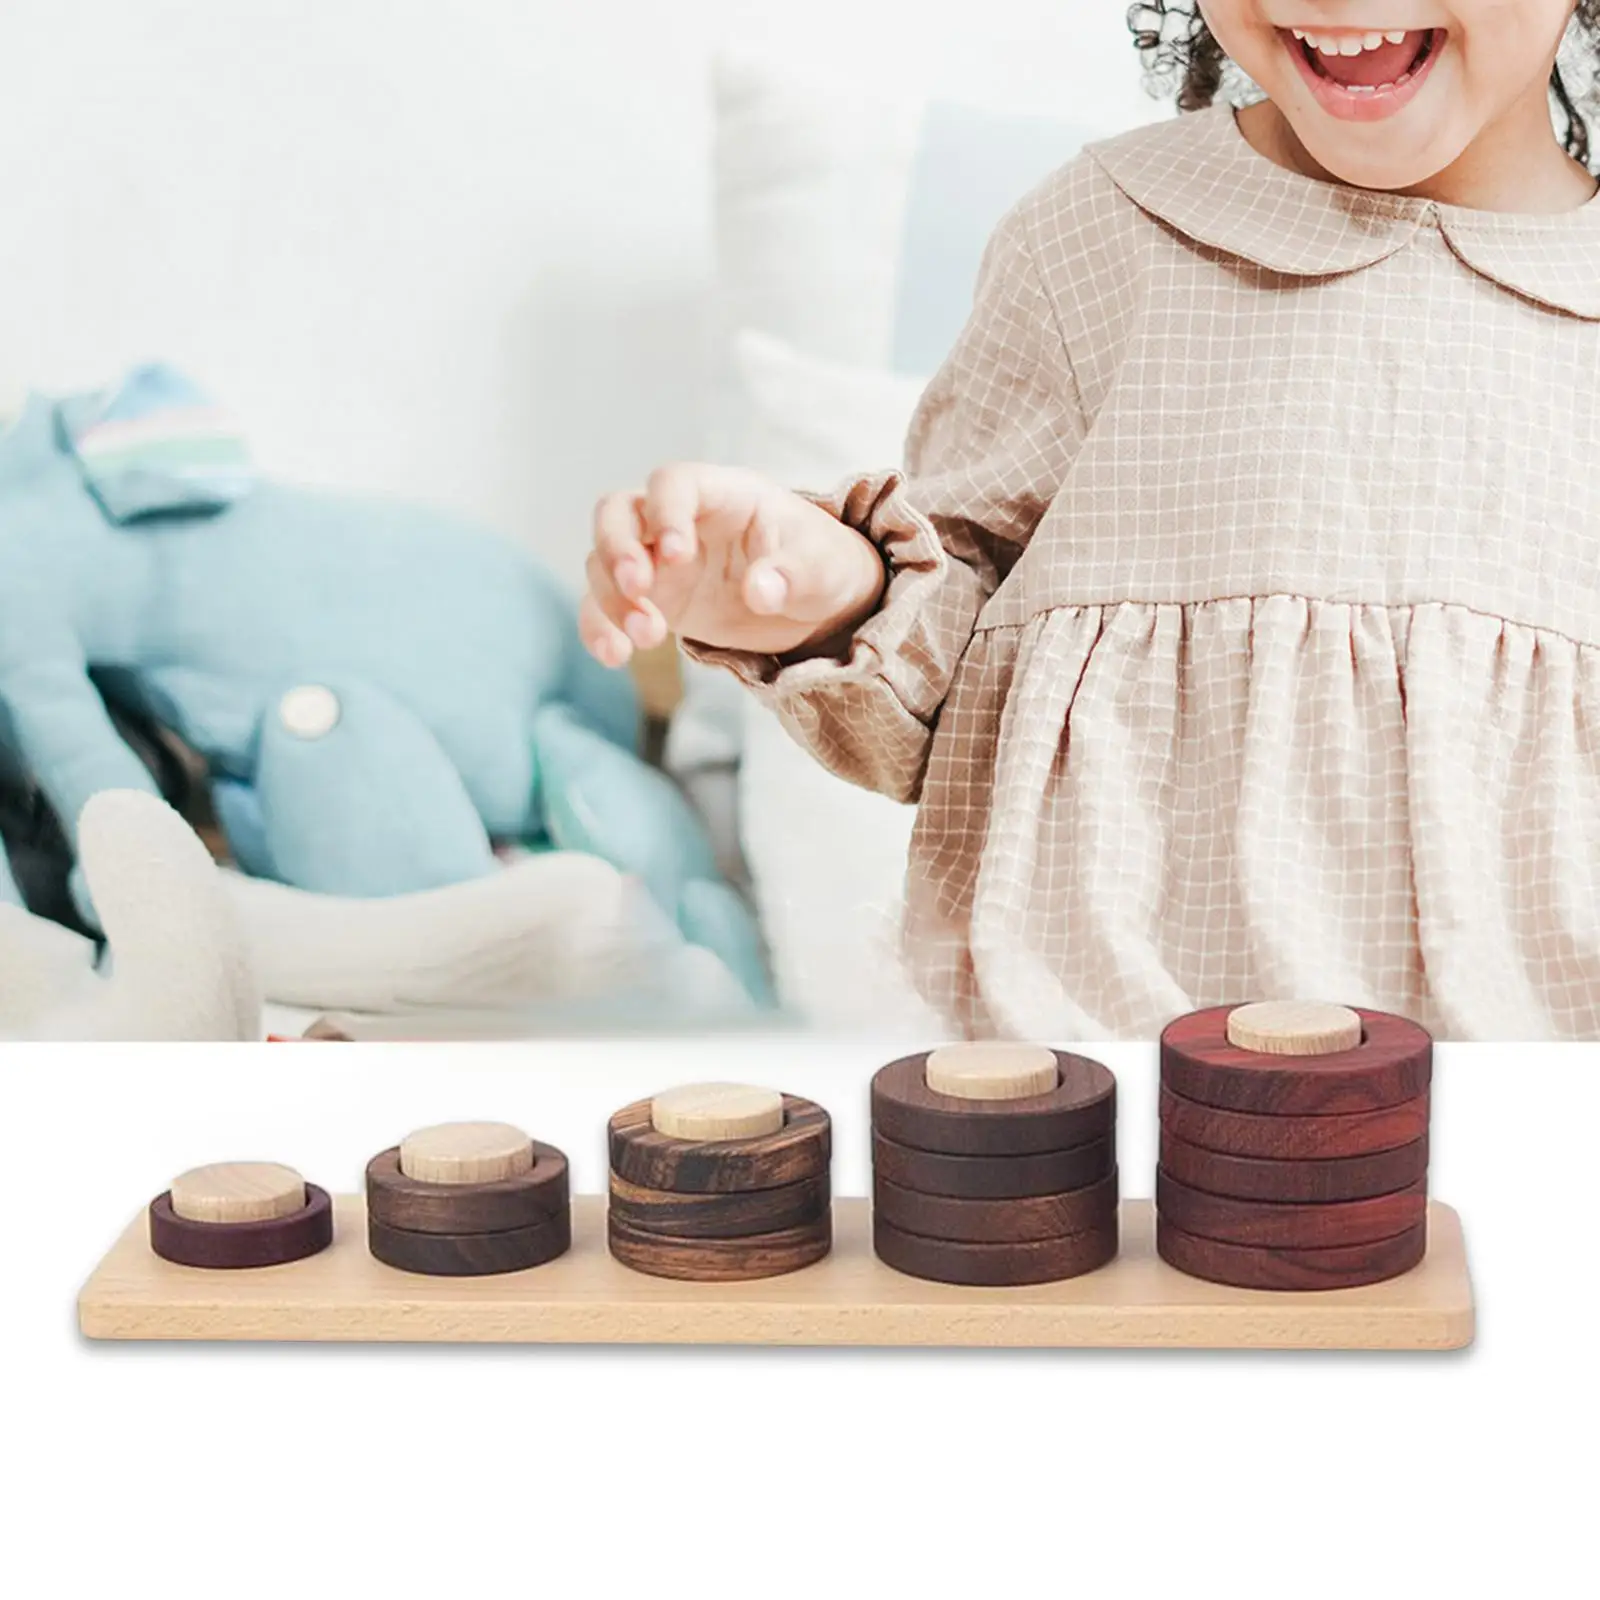 Wooden Stacking Toys Fine Motor Skills Sensory Toys Developmental Toy Educational Learning Toy for Toddlers Girls Boy Kids Gifts